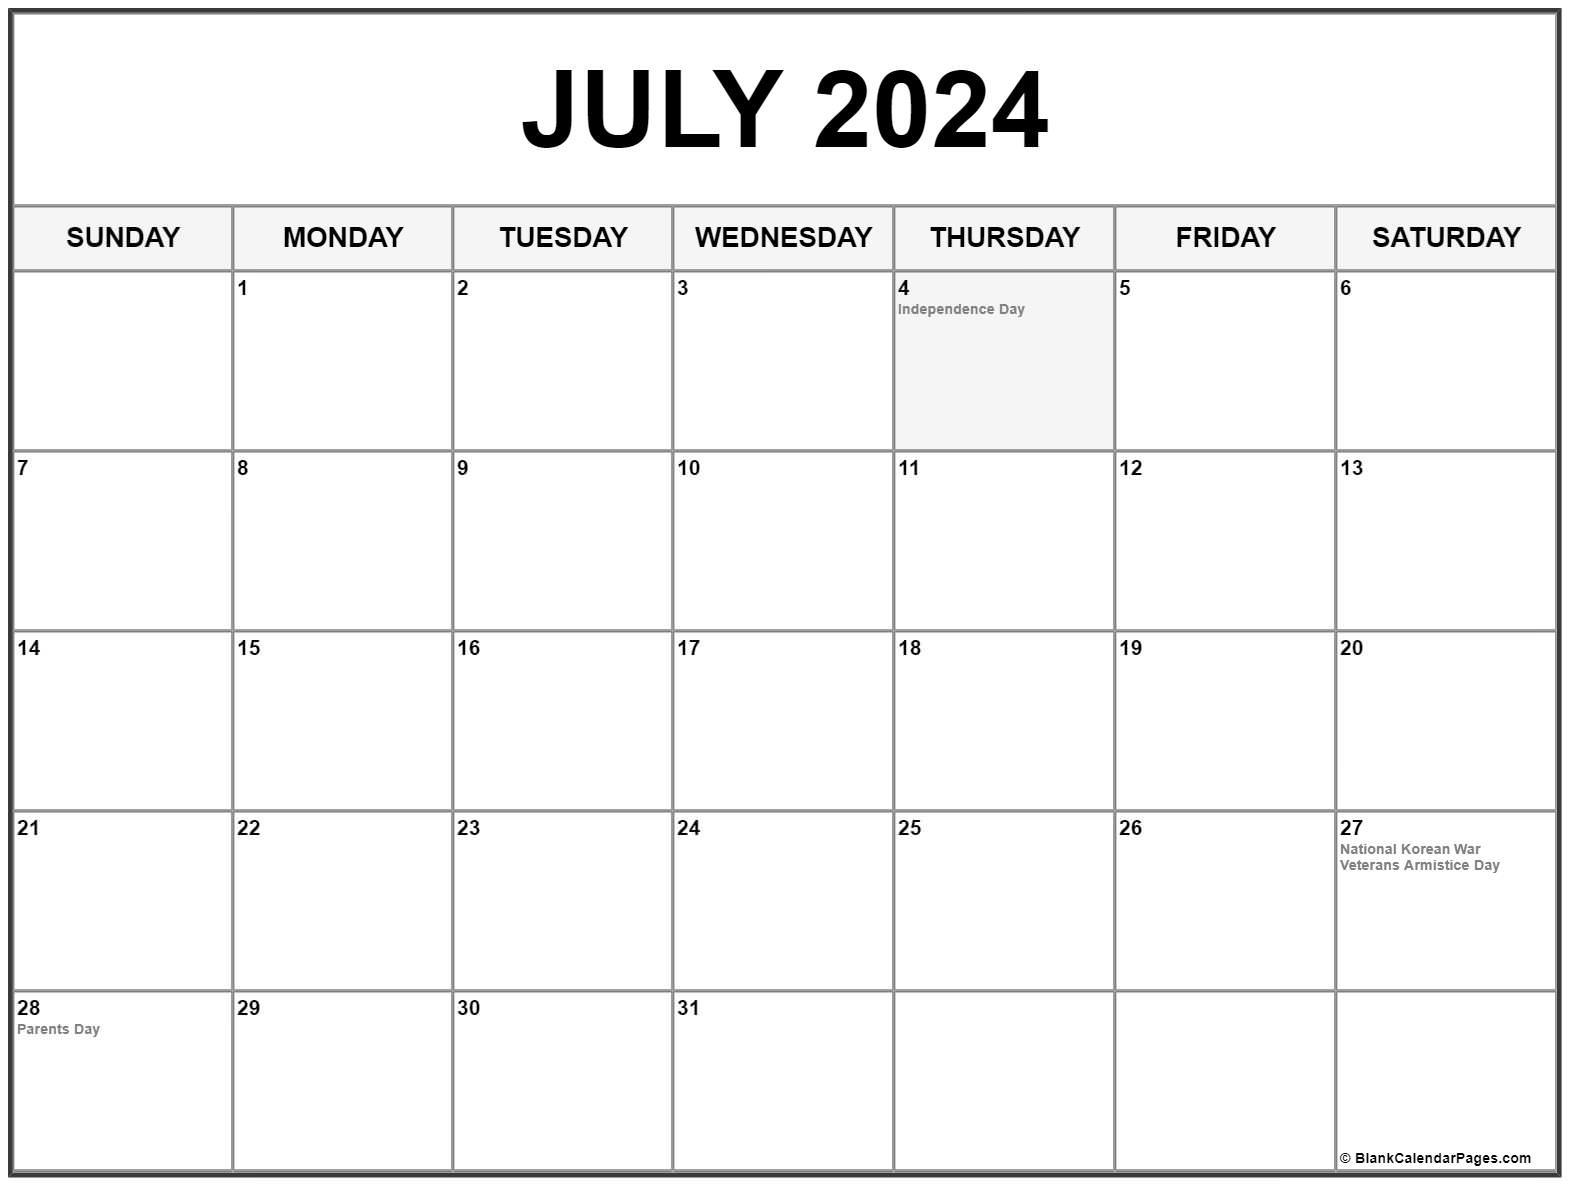 July 2024 With Holidays Calendar pertaining to July 13th Holiday Calendar 2024